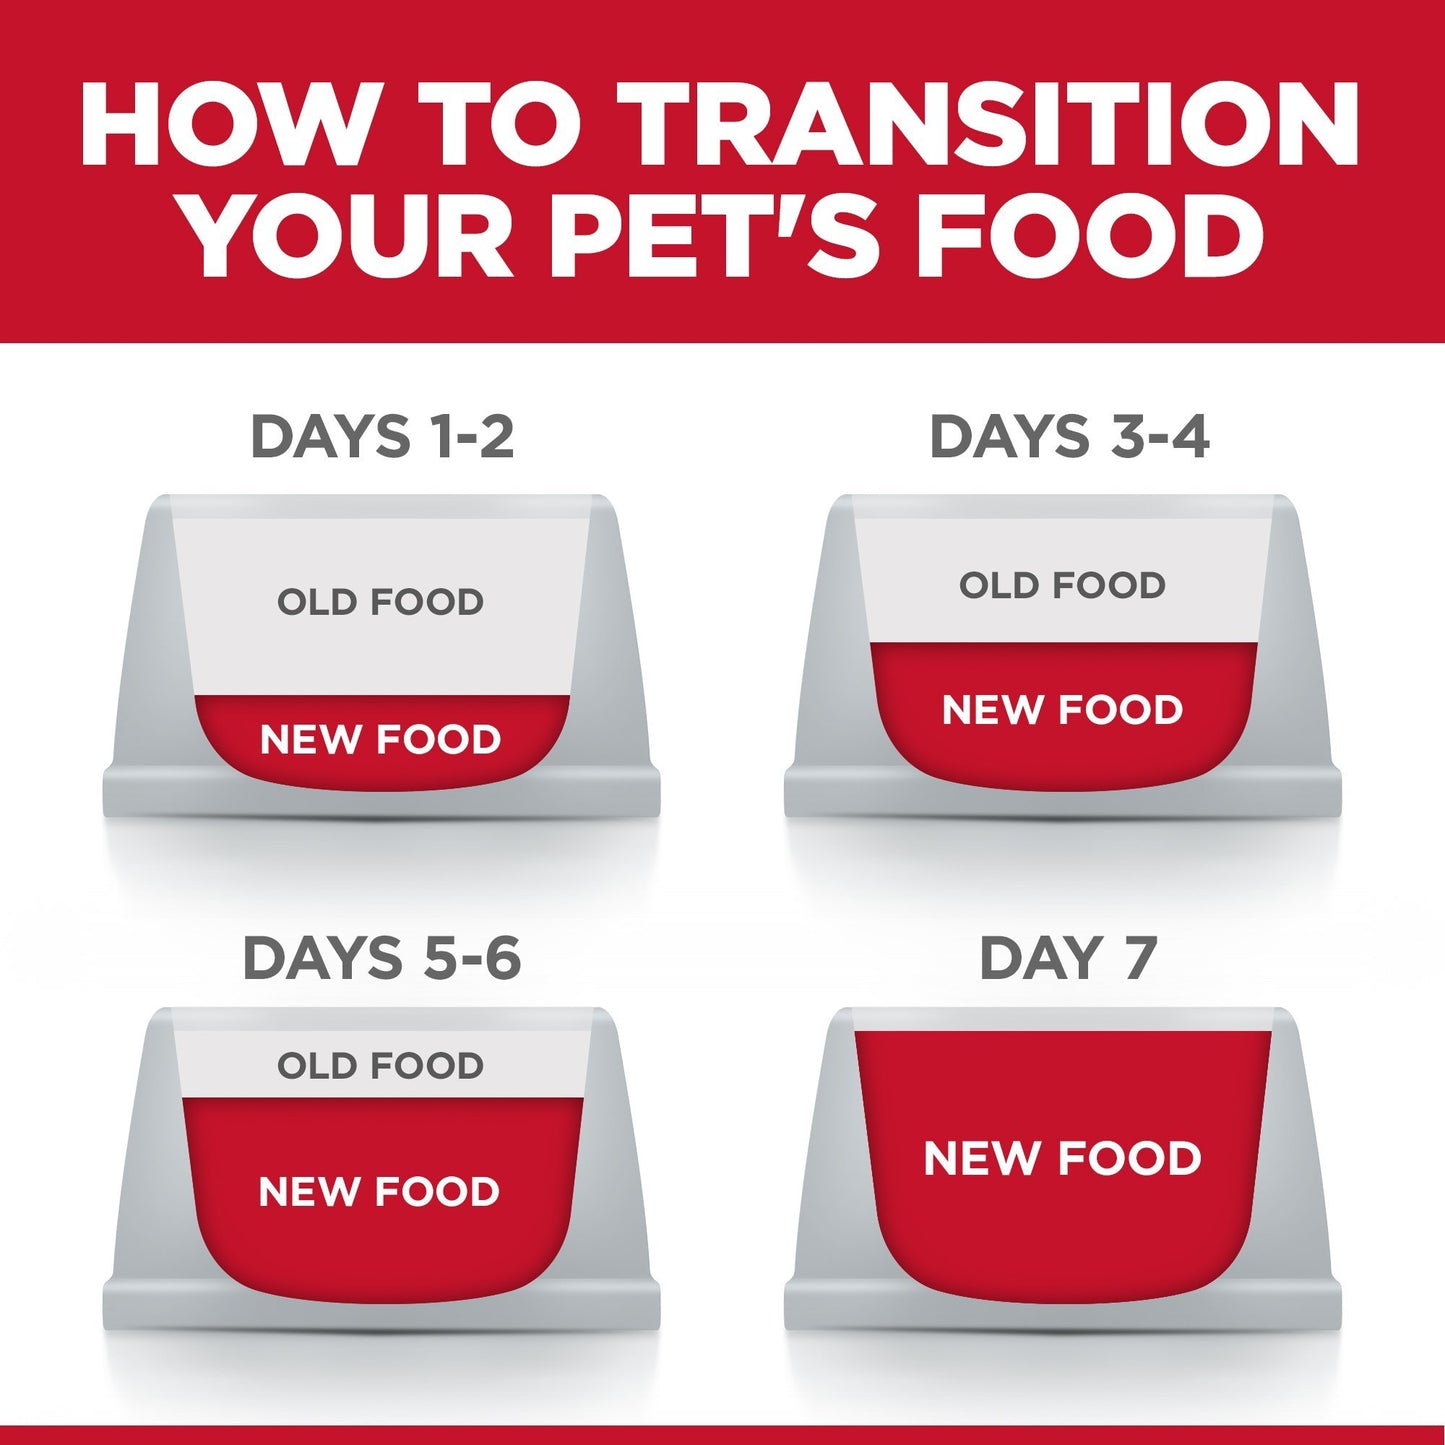 Hill's Science Diet Adult Perfect Weight Small Bites Dry Dog Food, Chicken Recipe  Dog Food  | PetMax Canada